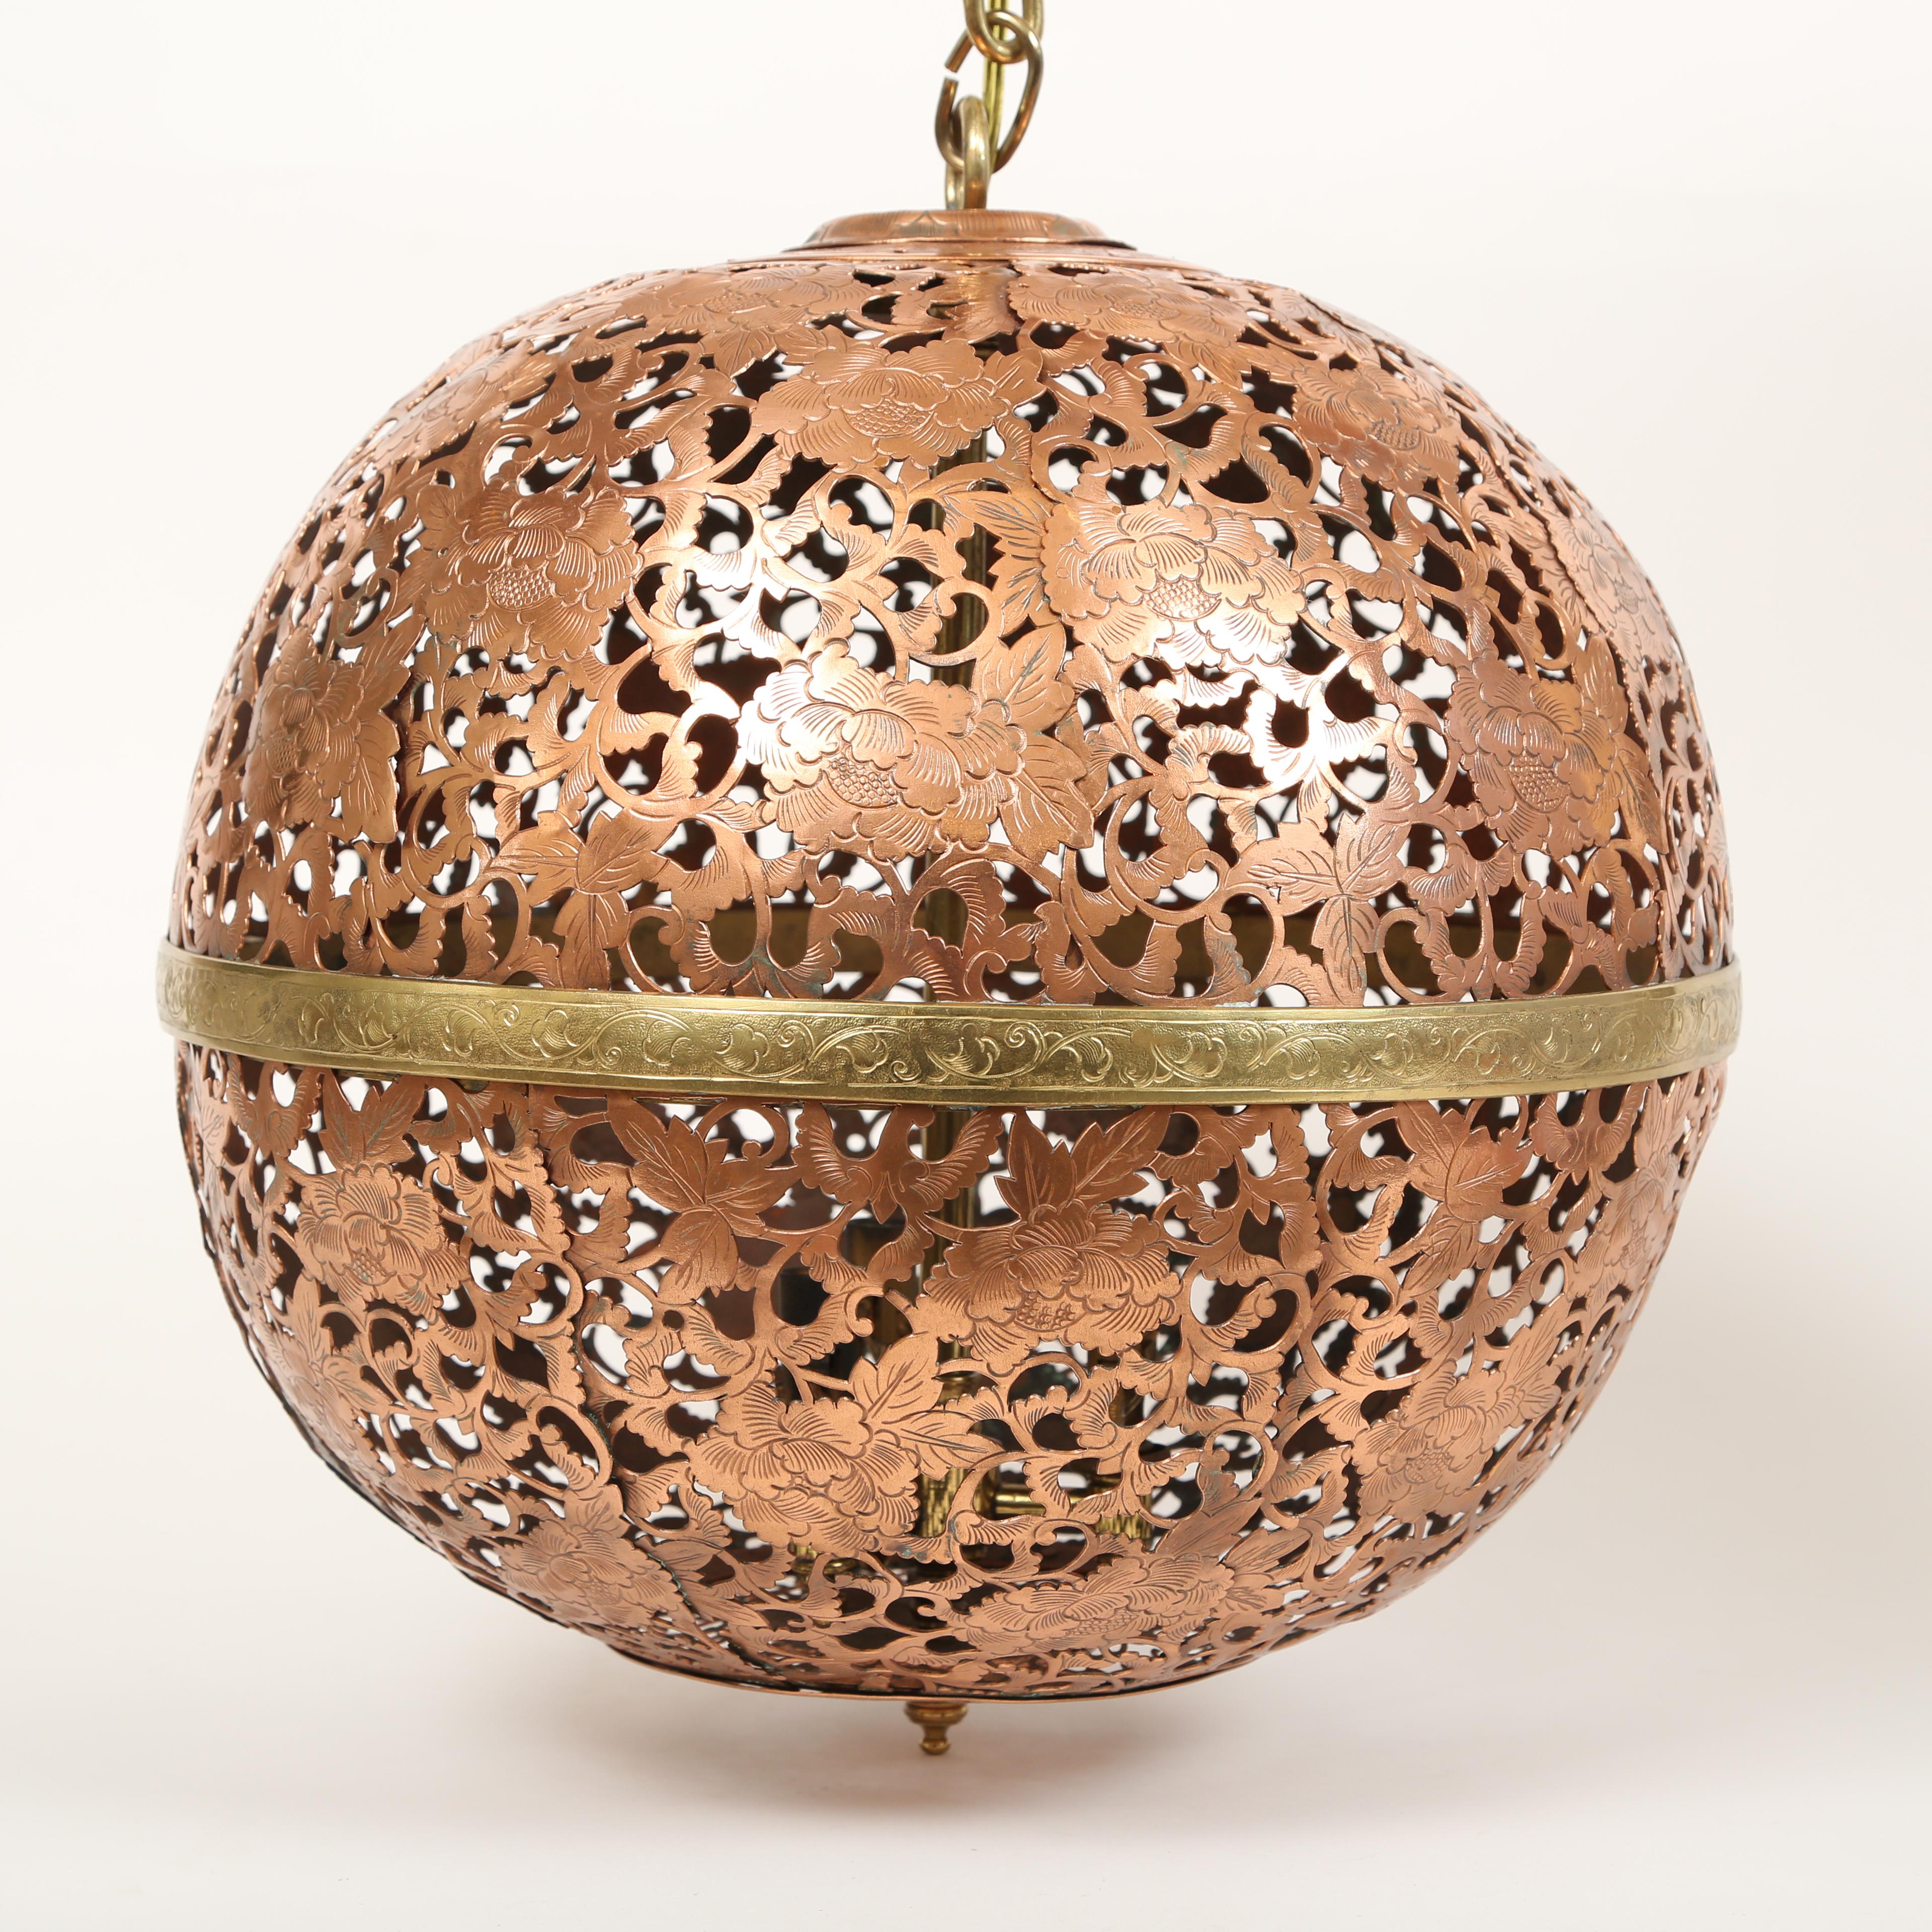 Round Moroccan lighting fixture on a chain with canopy. The copper fixture is pierced around a pattern of flowers, leaves and vines which are heavily engraved or chased. The canopy, chain and band around the middle of the fixture are all brass. The